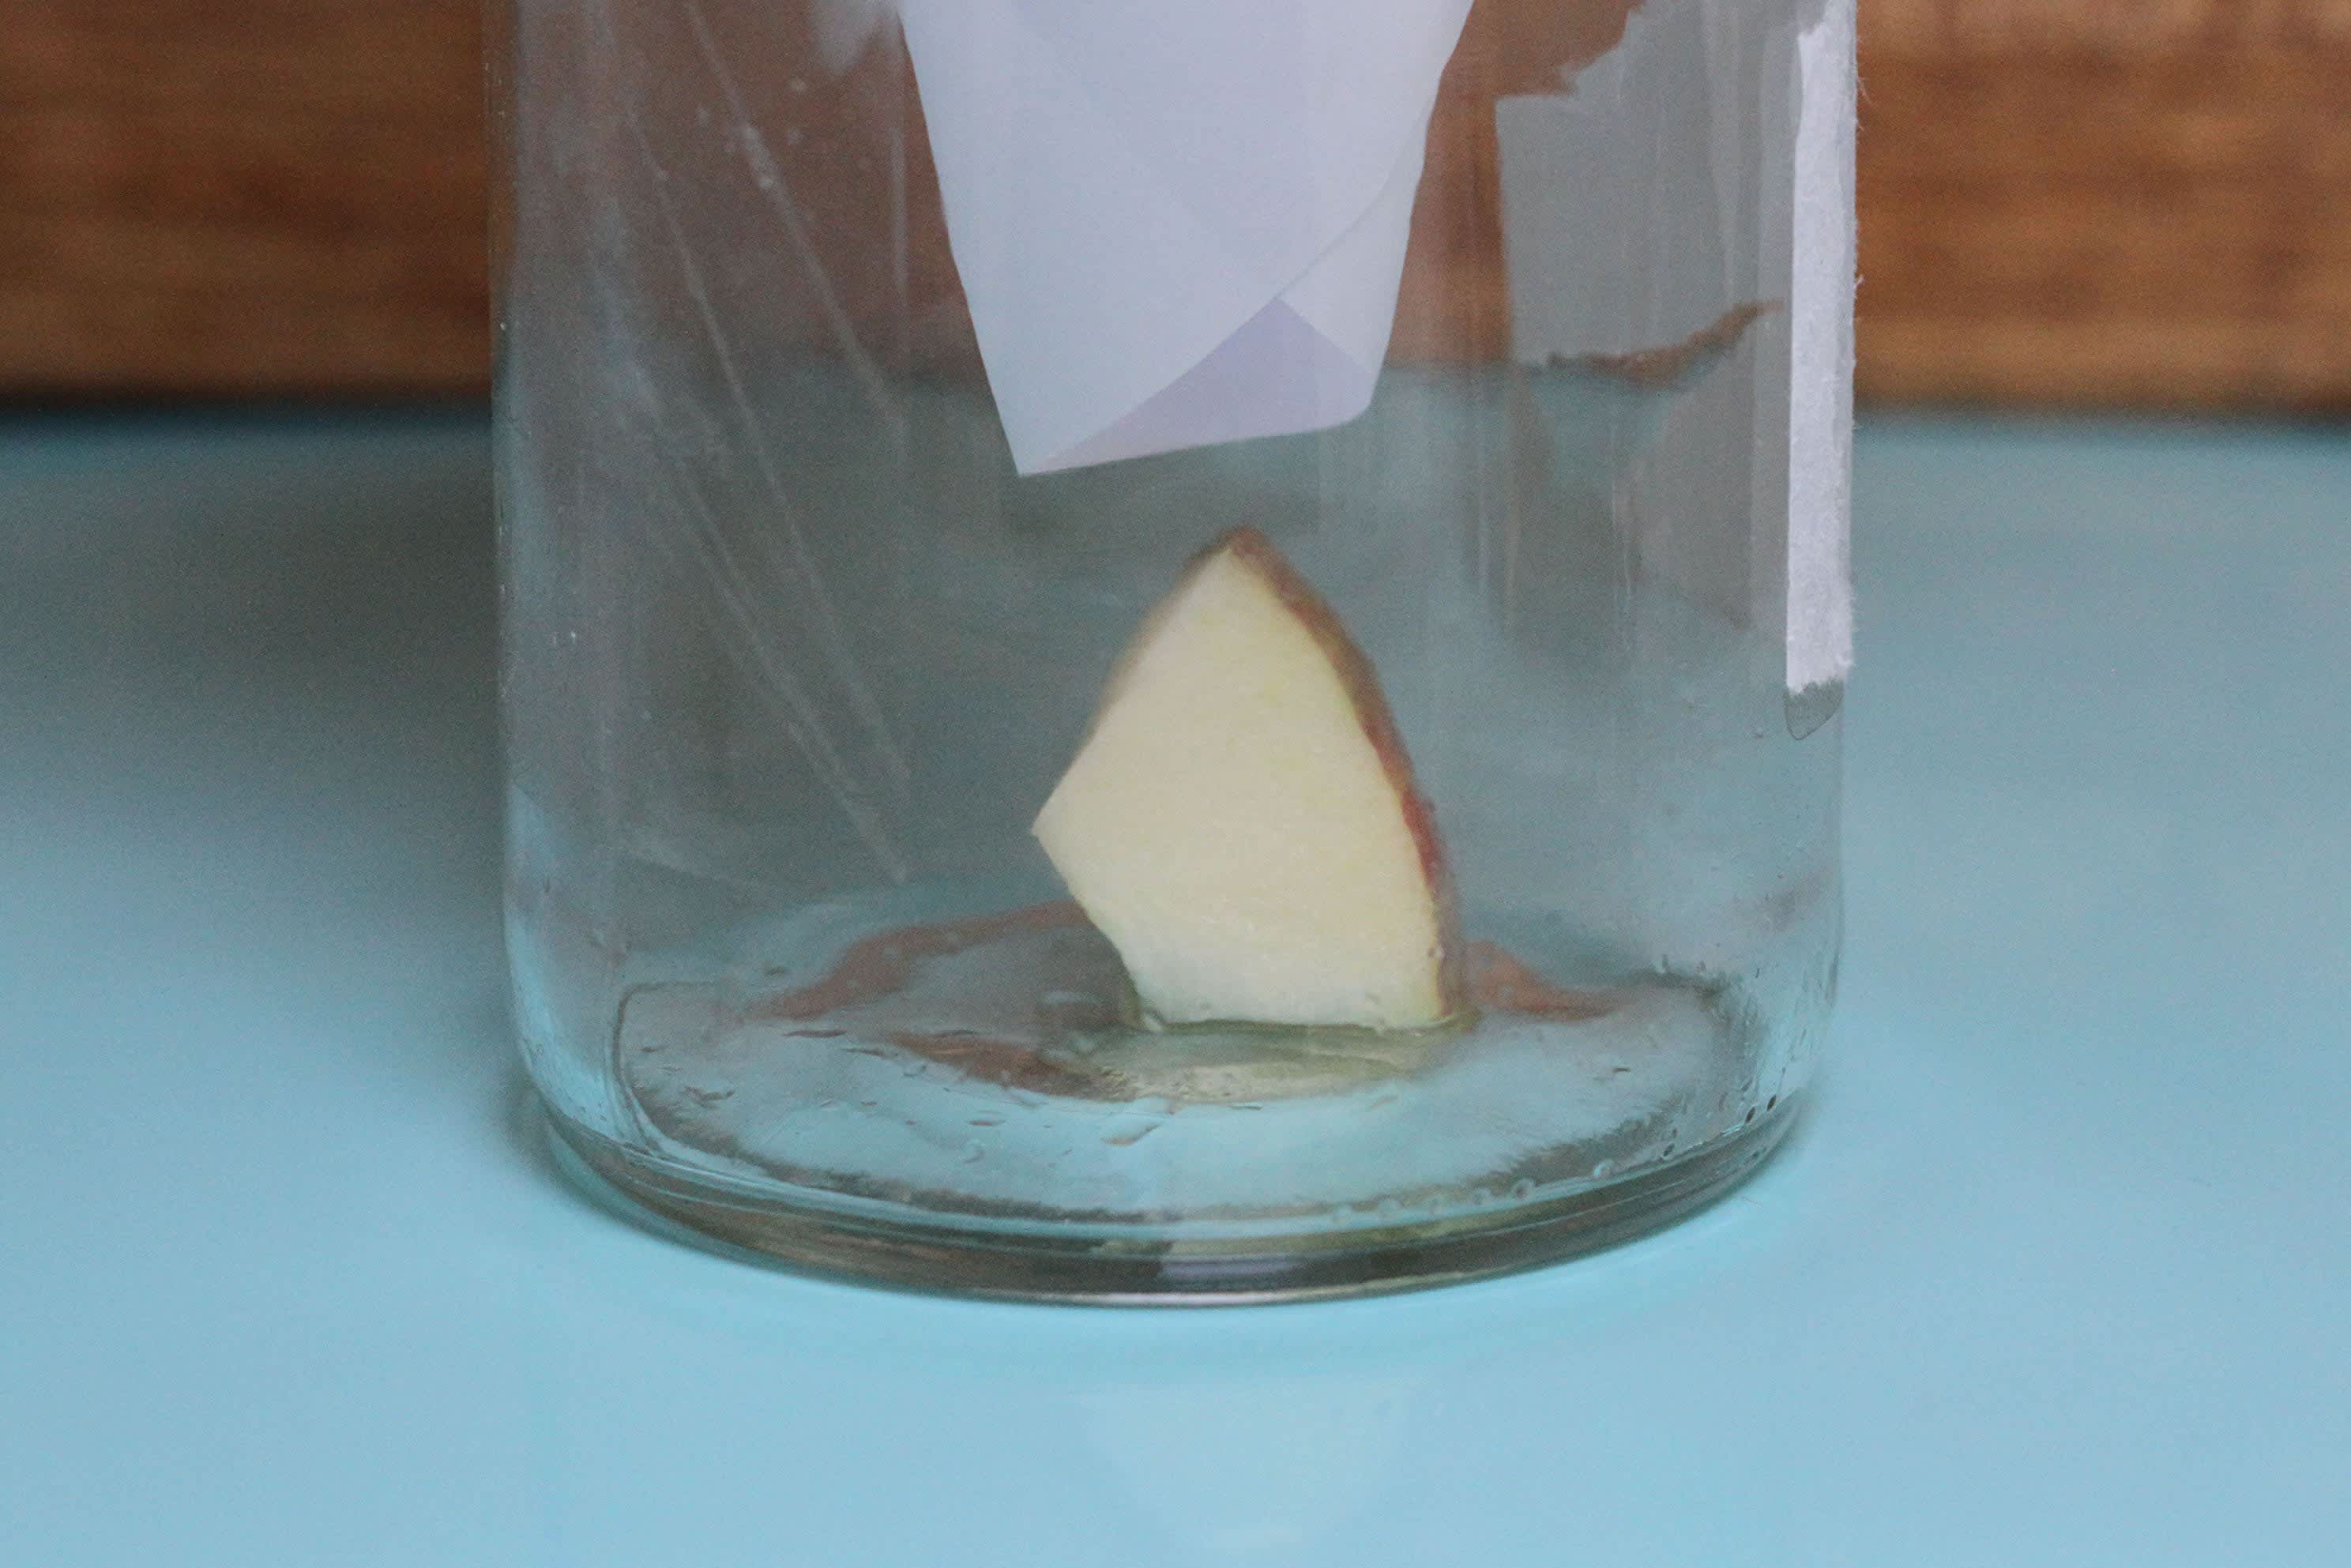 How To Make a Fruit Fly Trap (Paper Cone Hack)